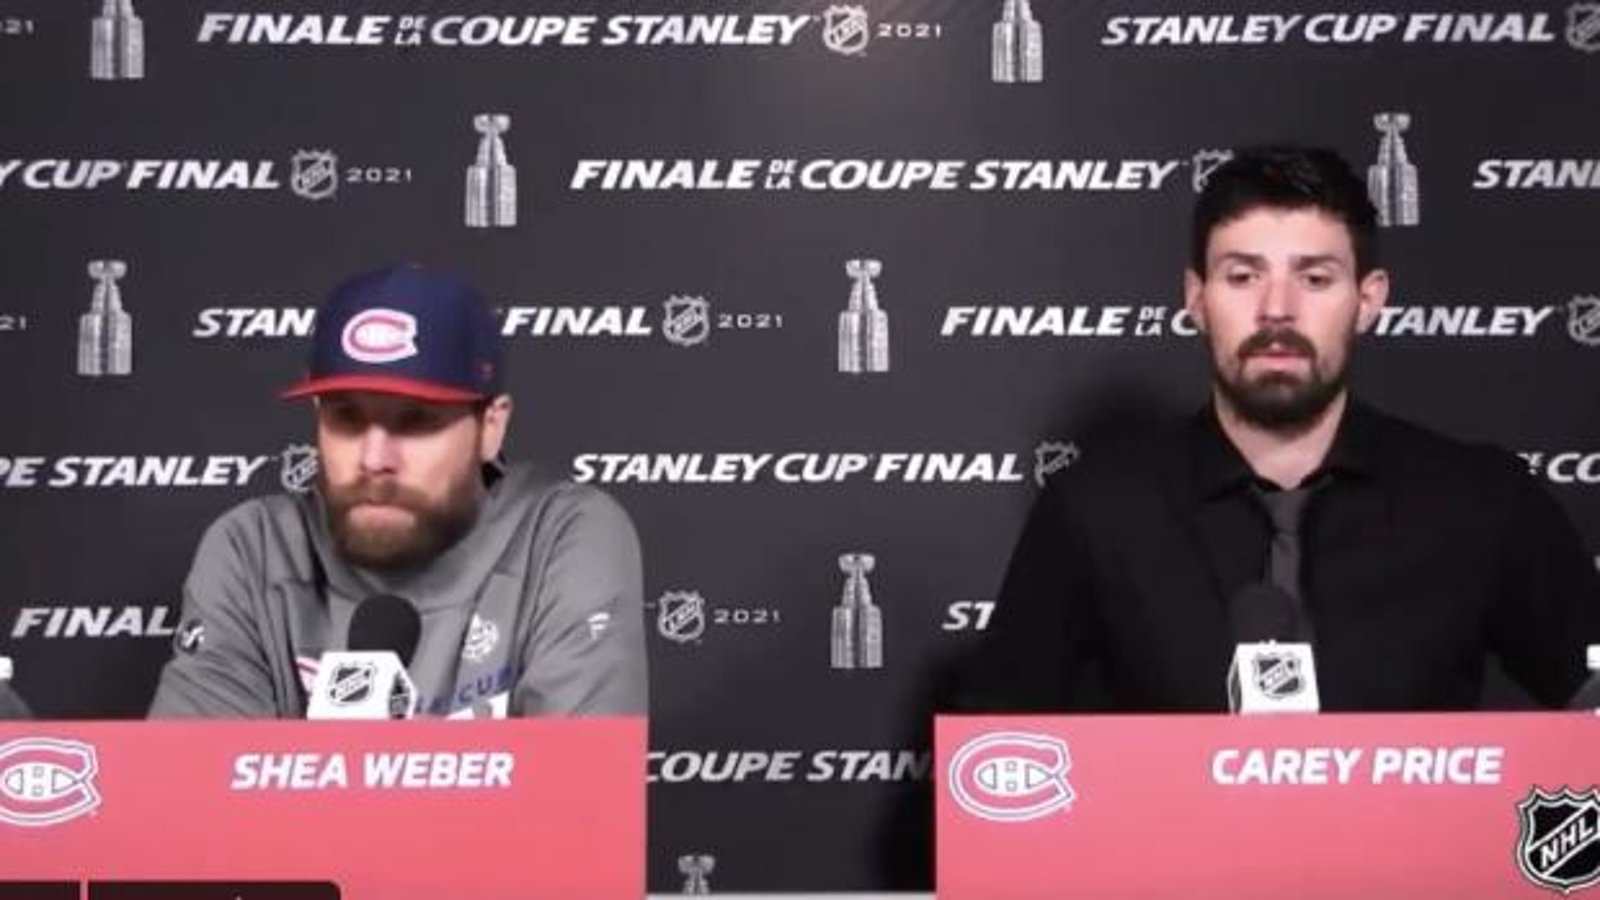 Price and Weber don’t answer questions on final media day